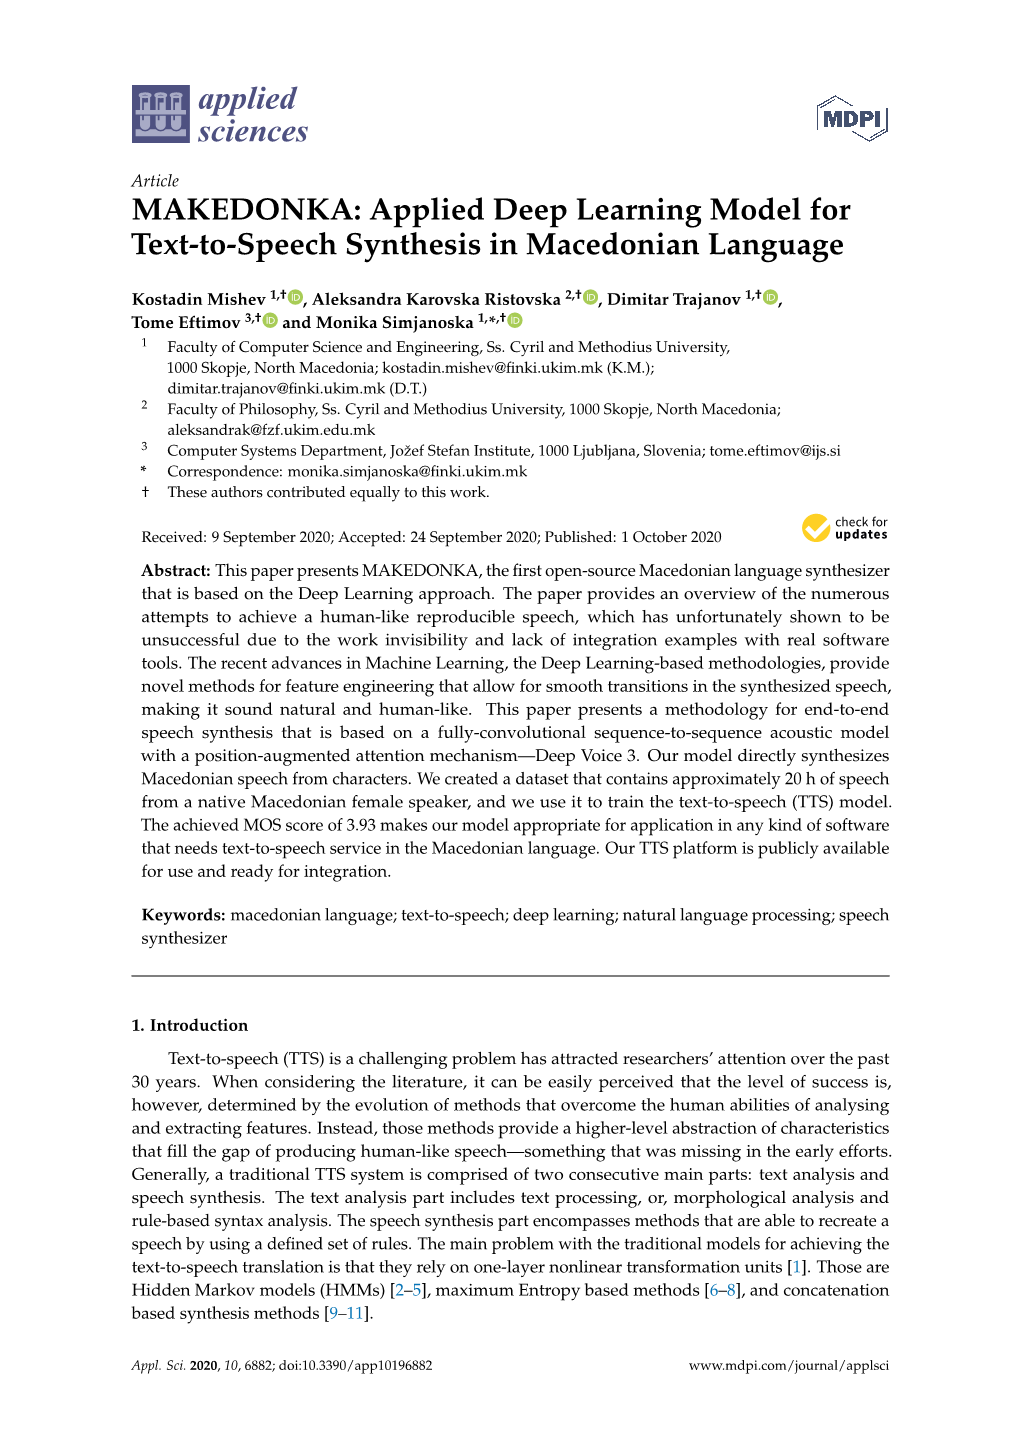 Applied Deep Learning Model for Text-To-Speech Synthesis in Macedonian Language